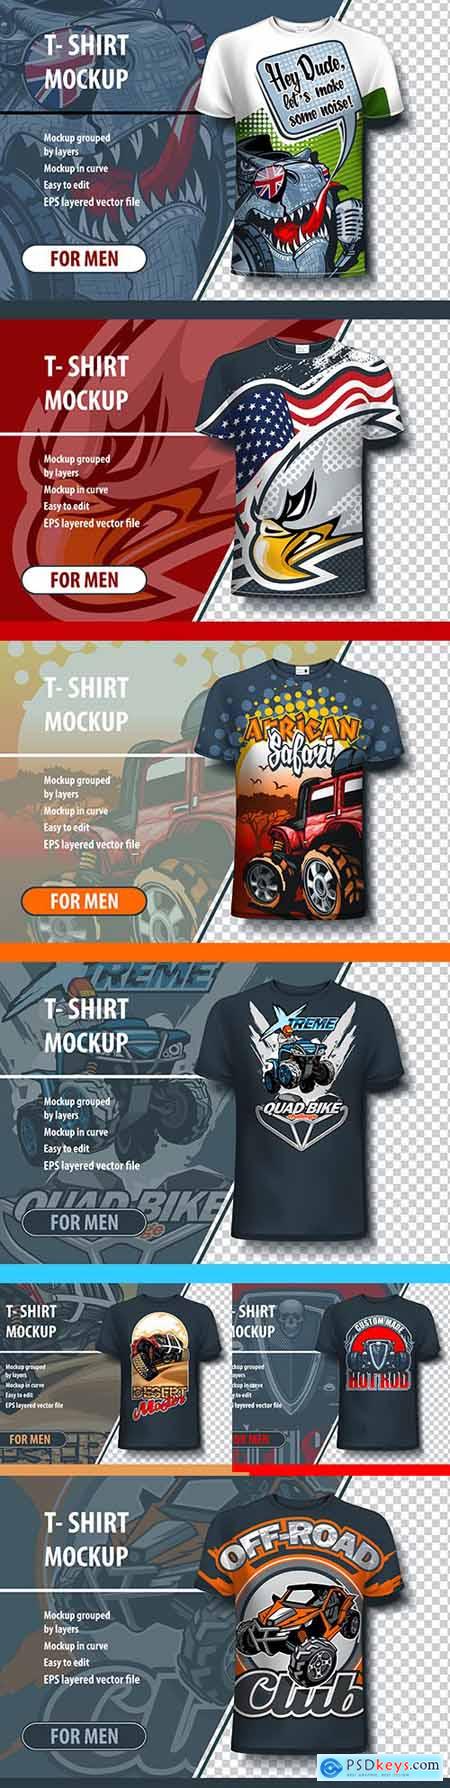 Design template T-shirt with logo for printing